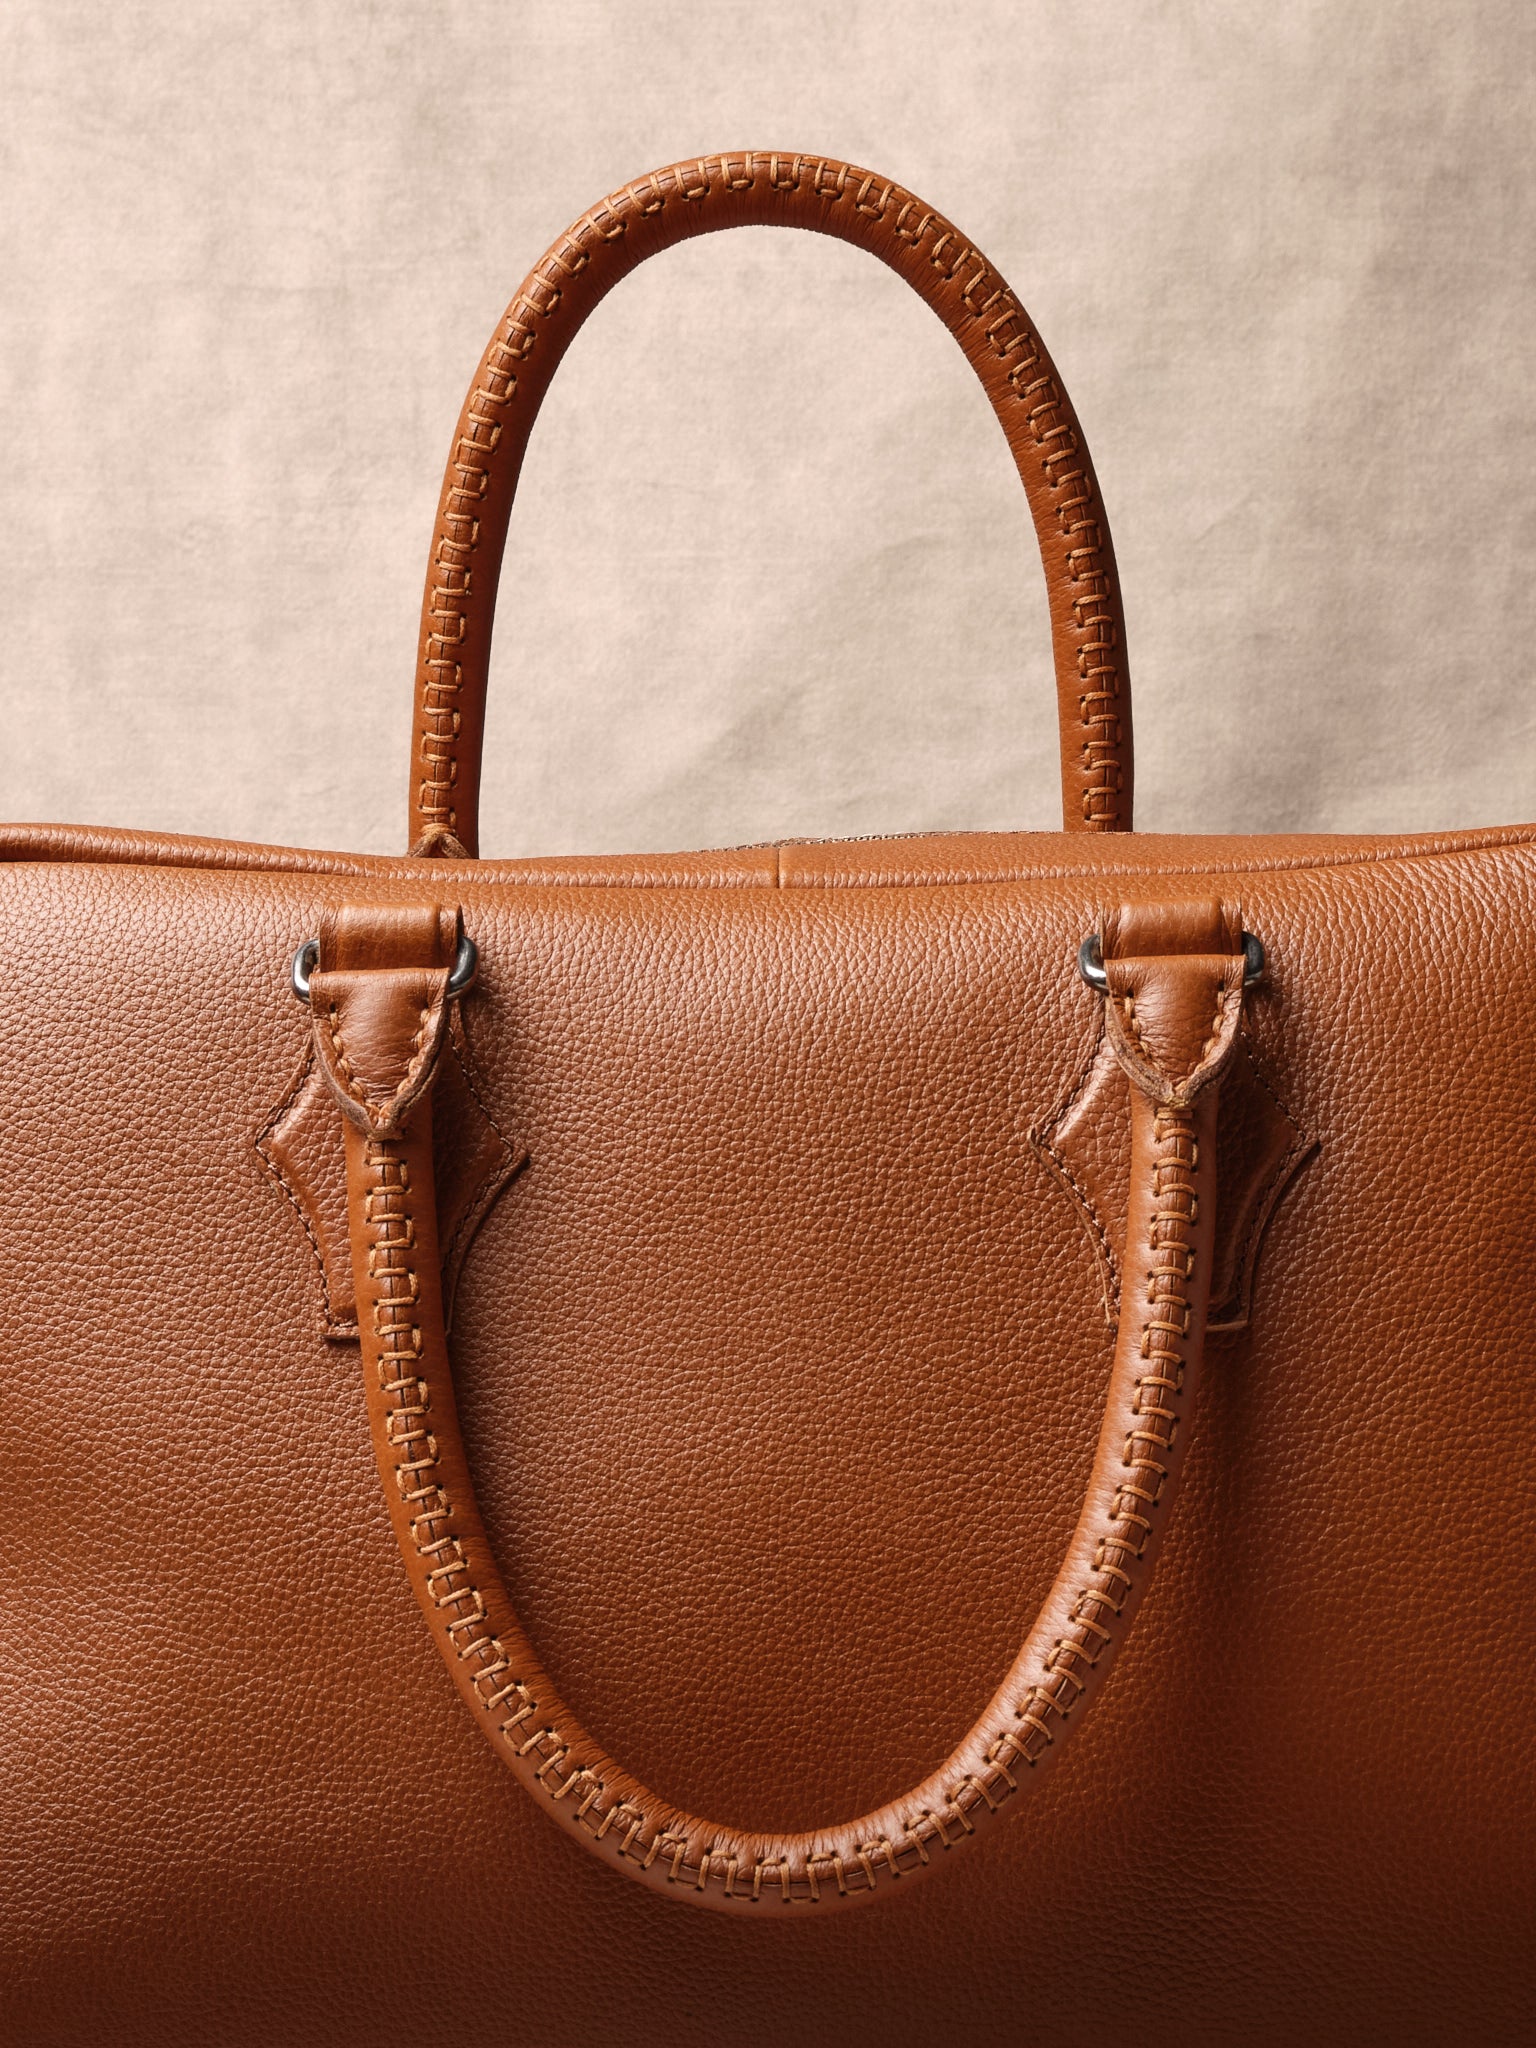 Cylindrical Hand-stitched Handles. Mens Weekender Bags Tan by Capra Leather